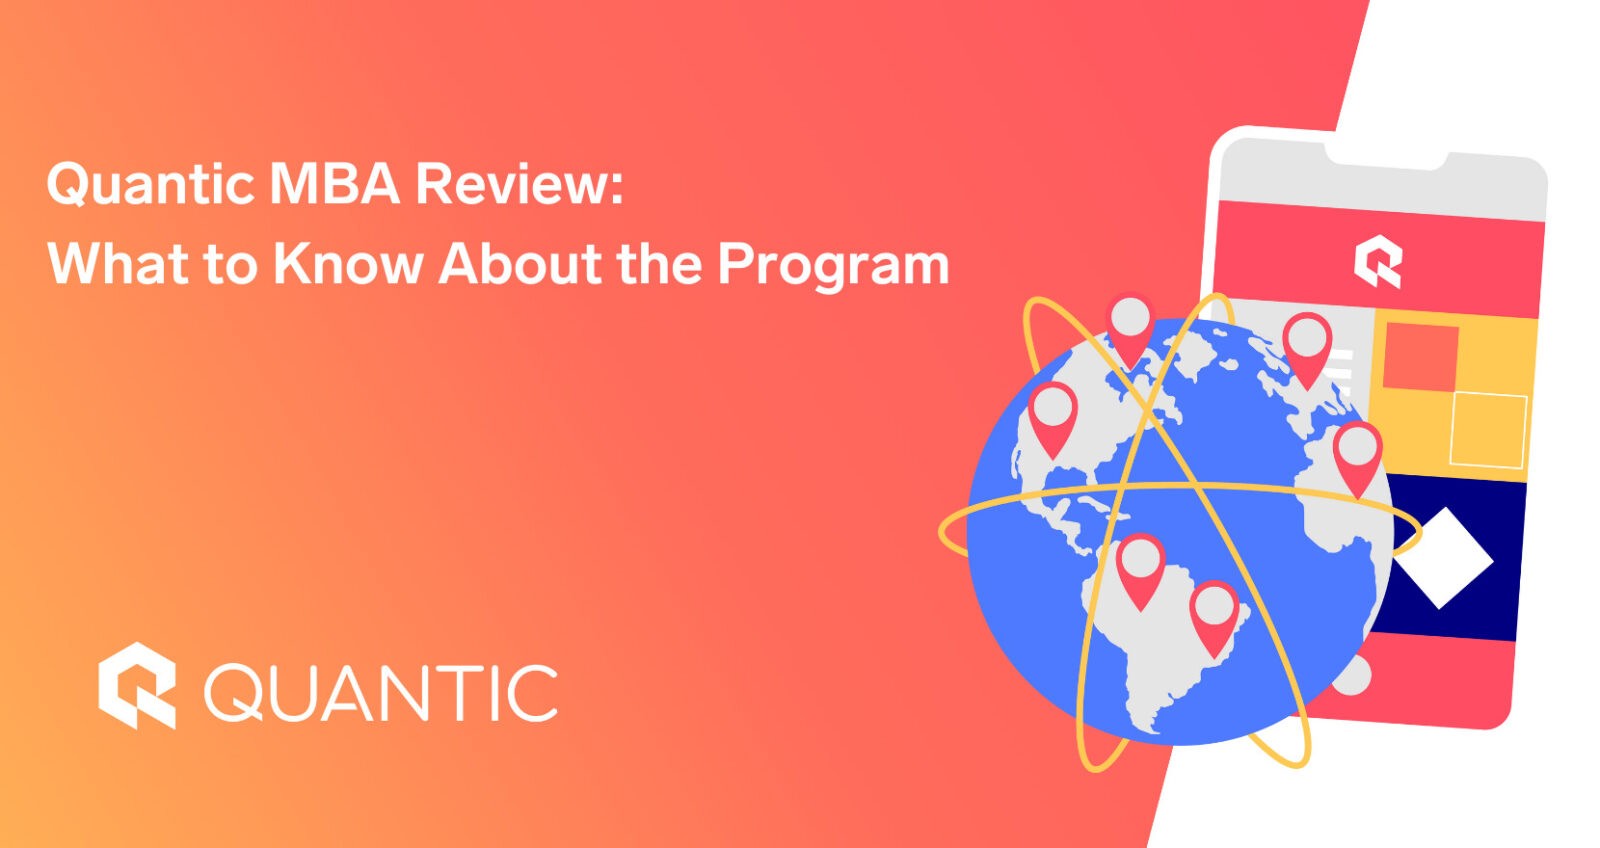 Quantic MBA Review: What to know about the program